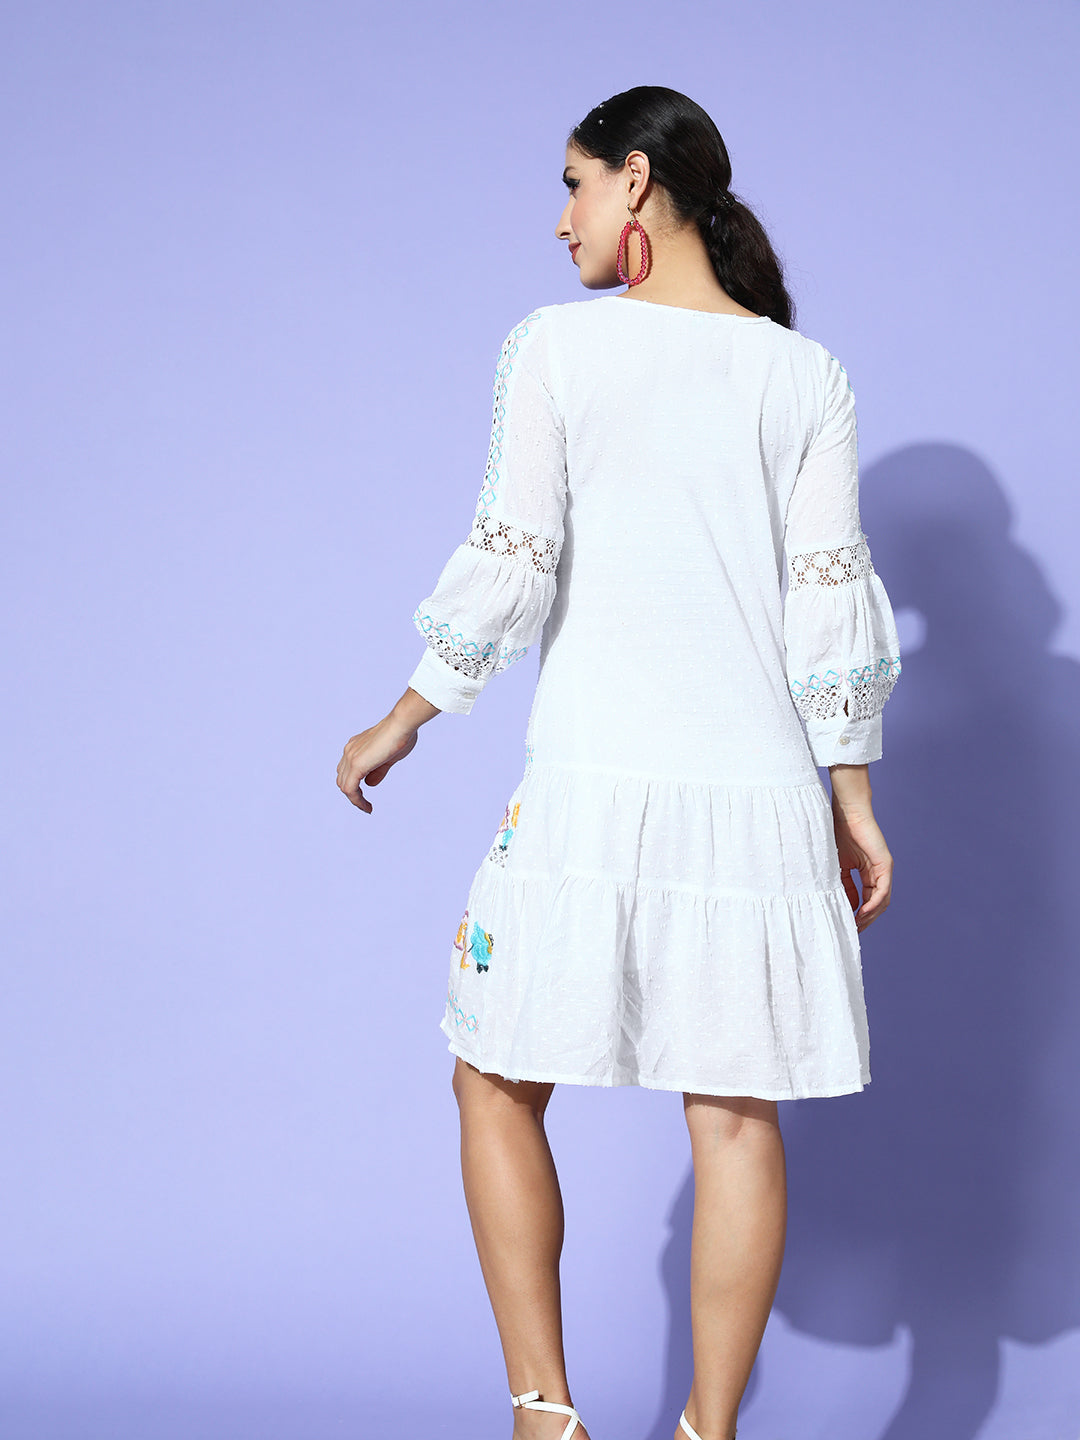 Ishin Women's Cotton White Embroidered A-Line Dress